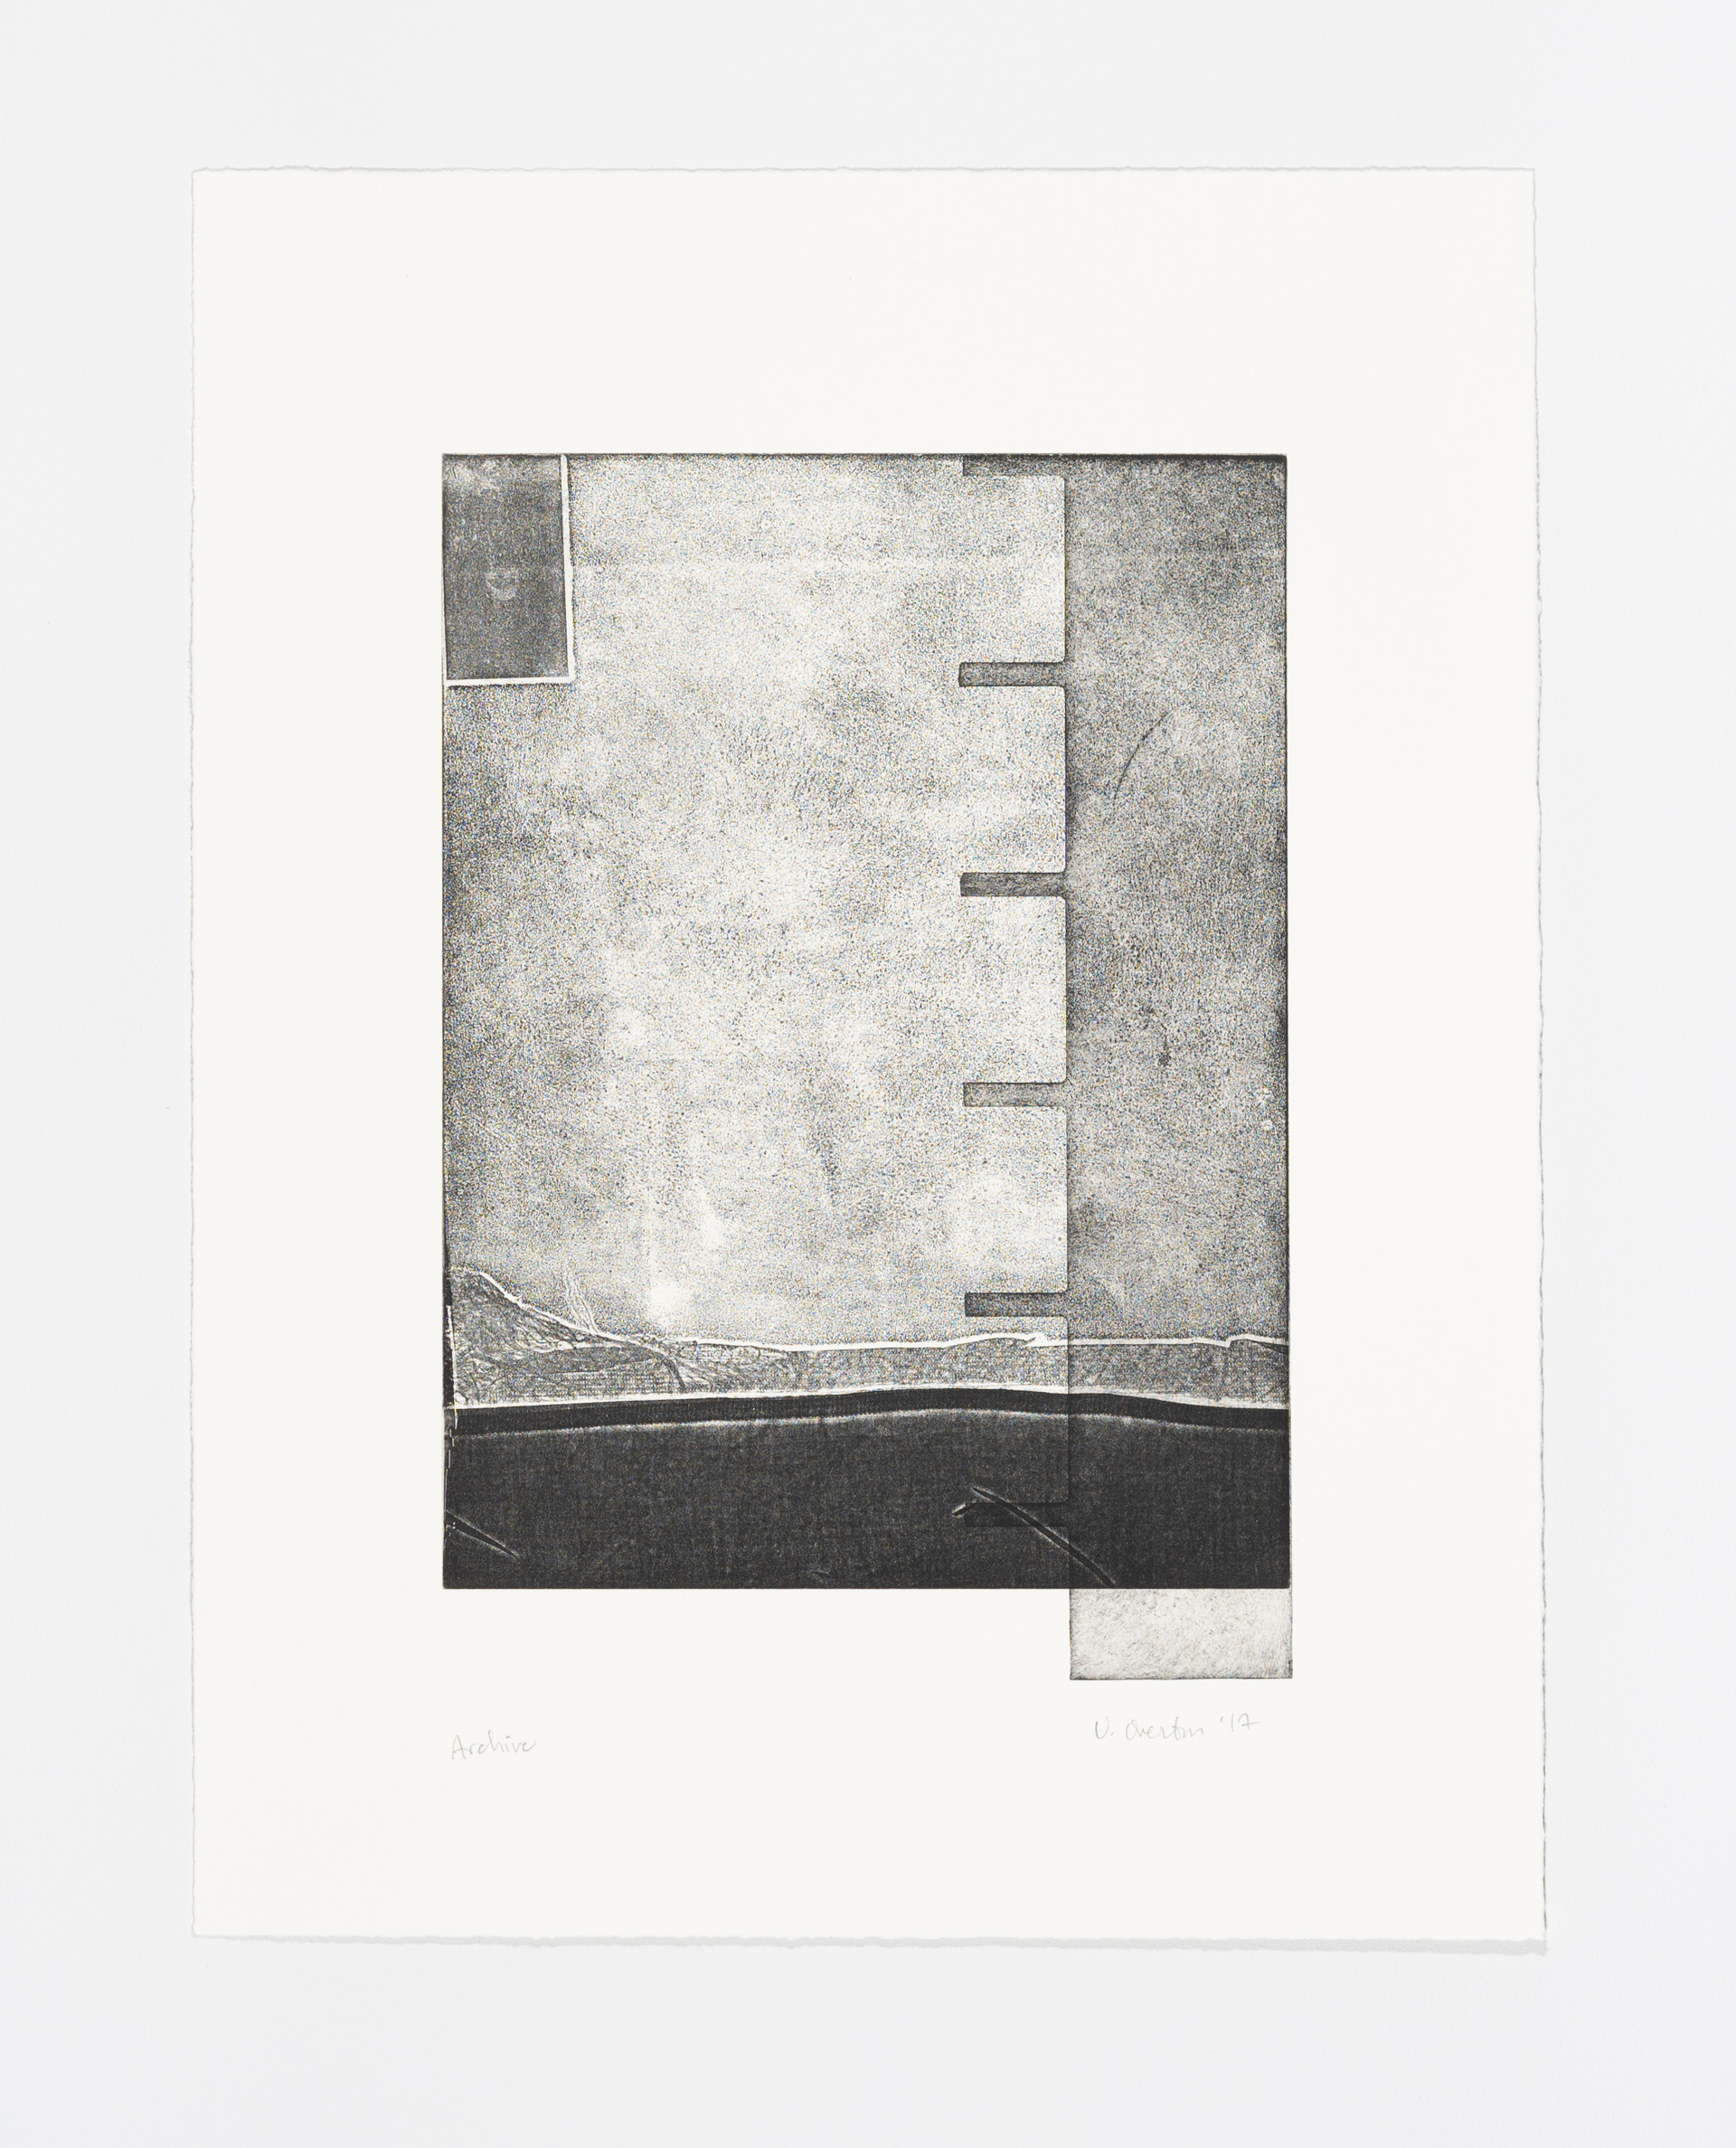 Virginia Overton | Etching and Photogravure